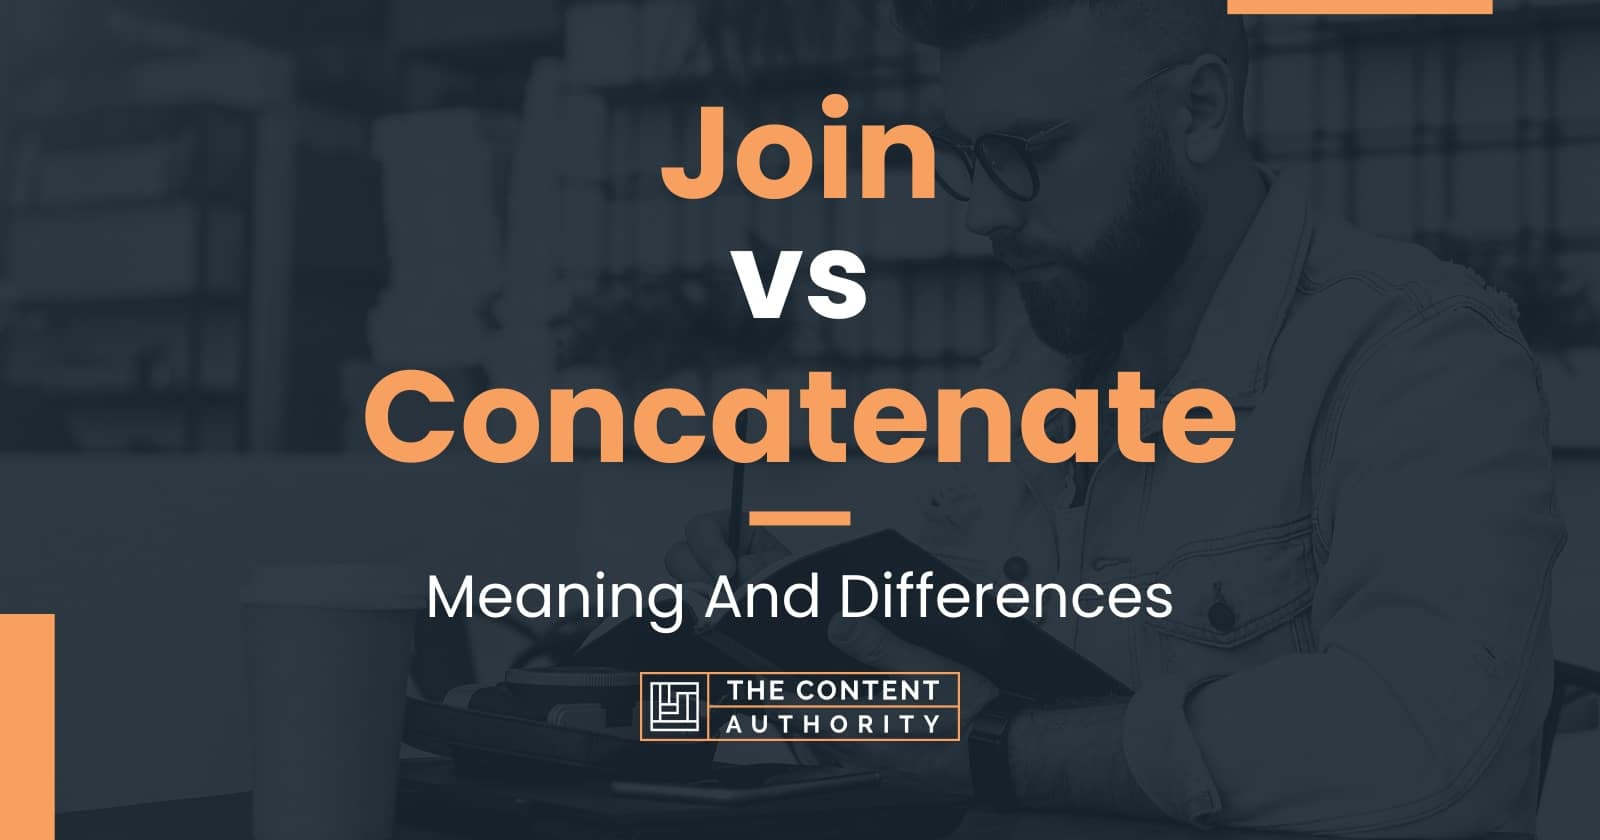 Join Vs Concatenate Meaning And Differences 8763